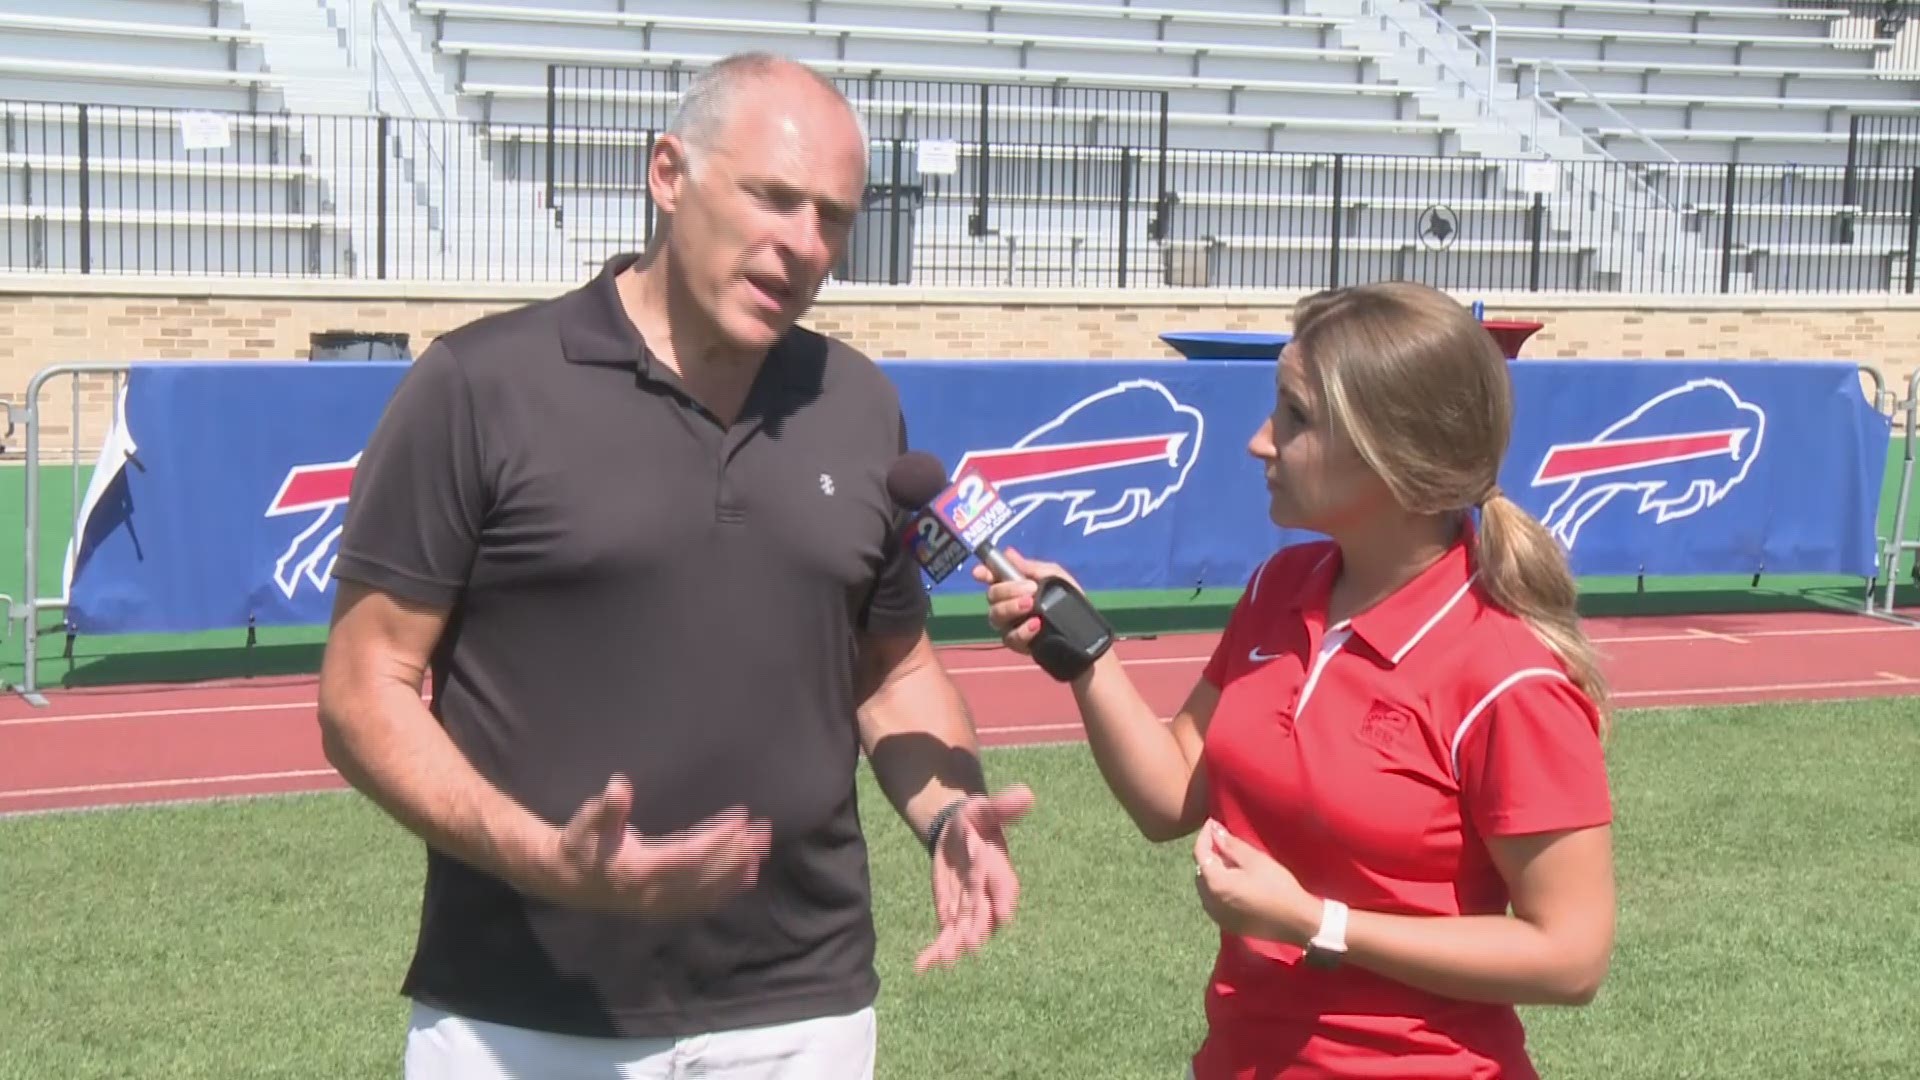 Heather Prusak and Vic Carucci of the Buffalo News give their opinions on the quarterback battle, some wide receivers to keep an eye on, what's going on at center and more.